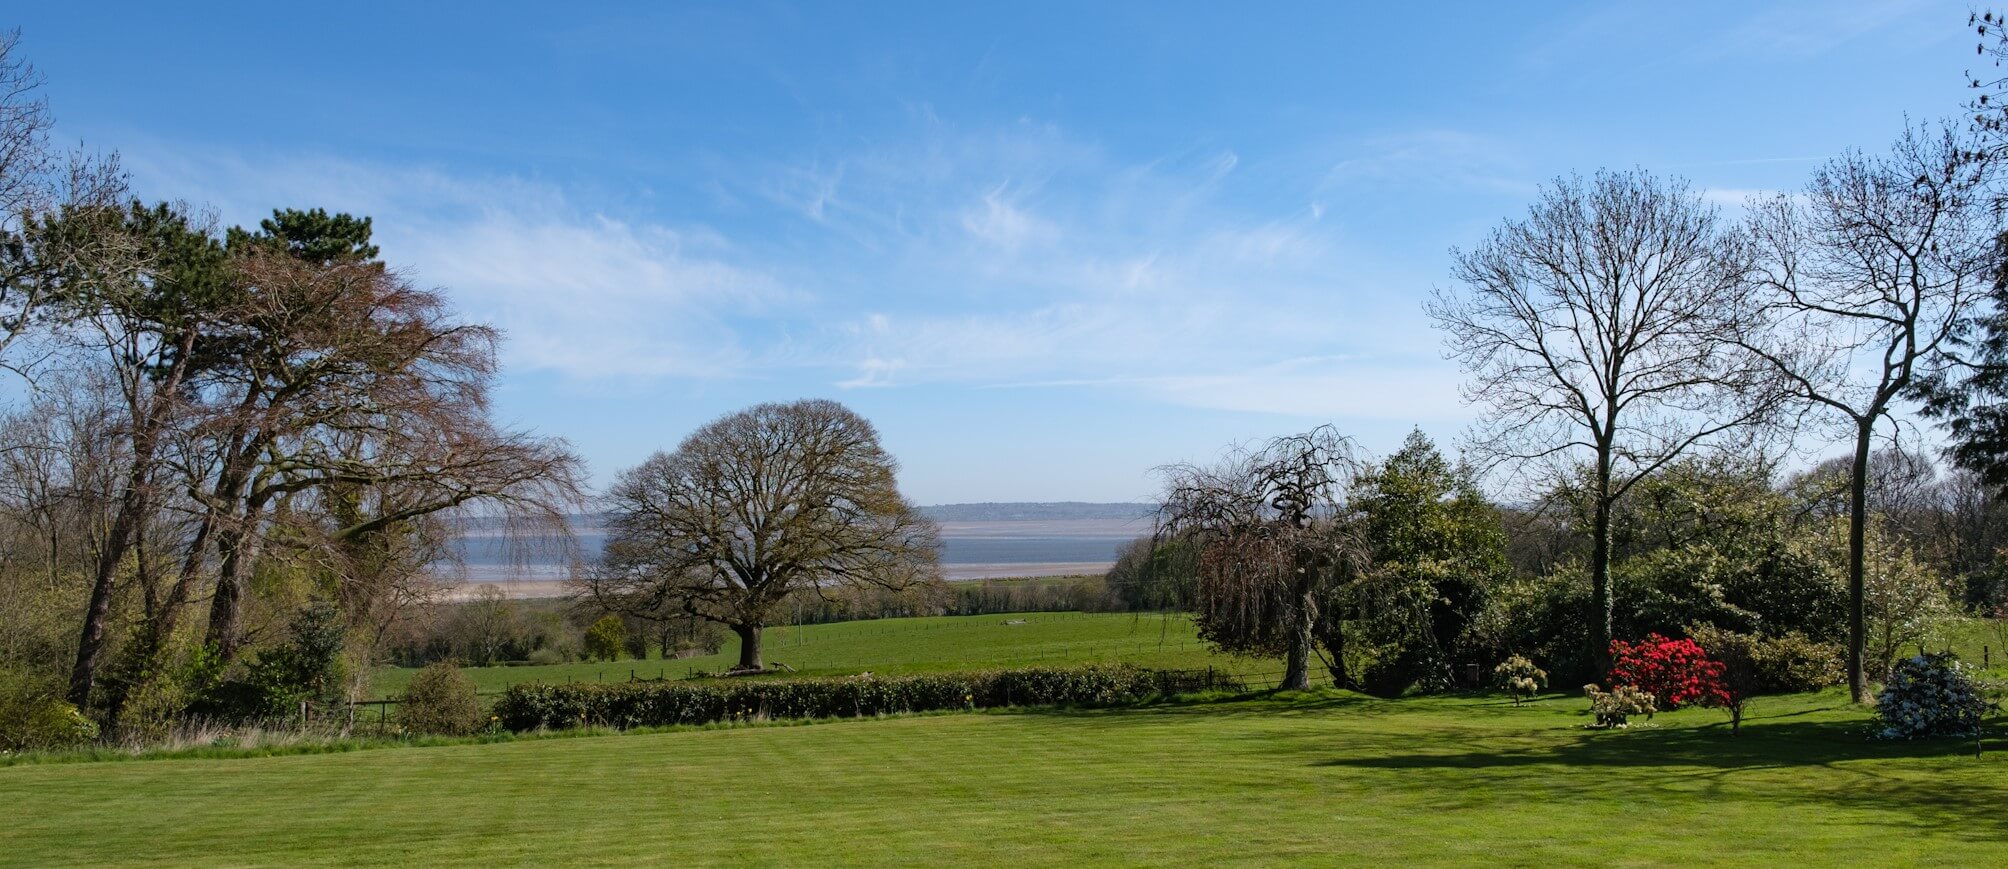 The view of the river Dee from Stokyn Hall